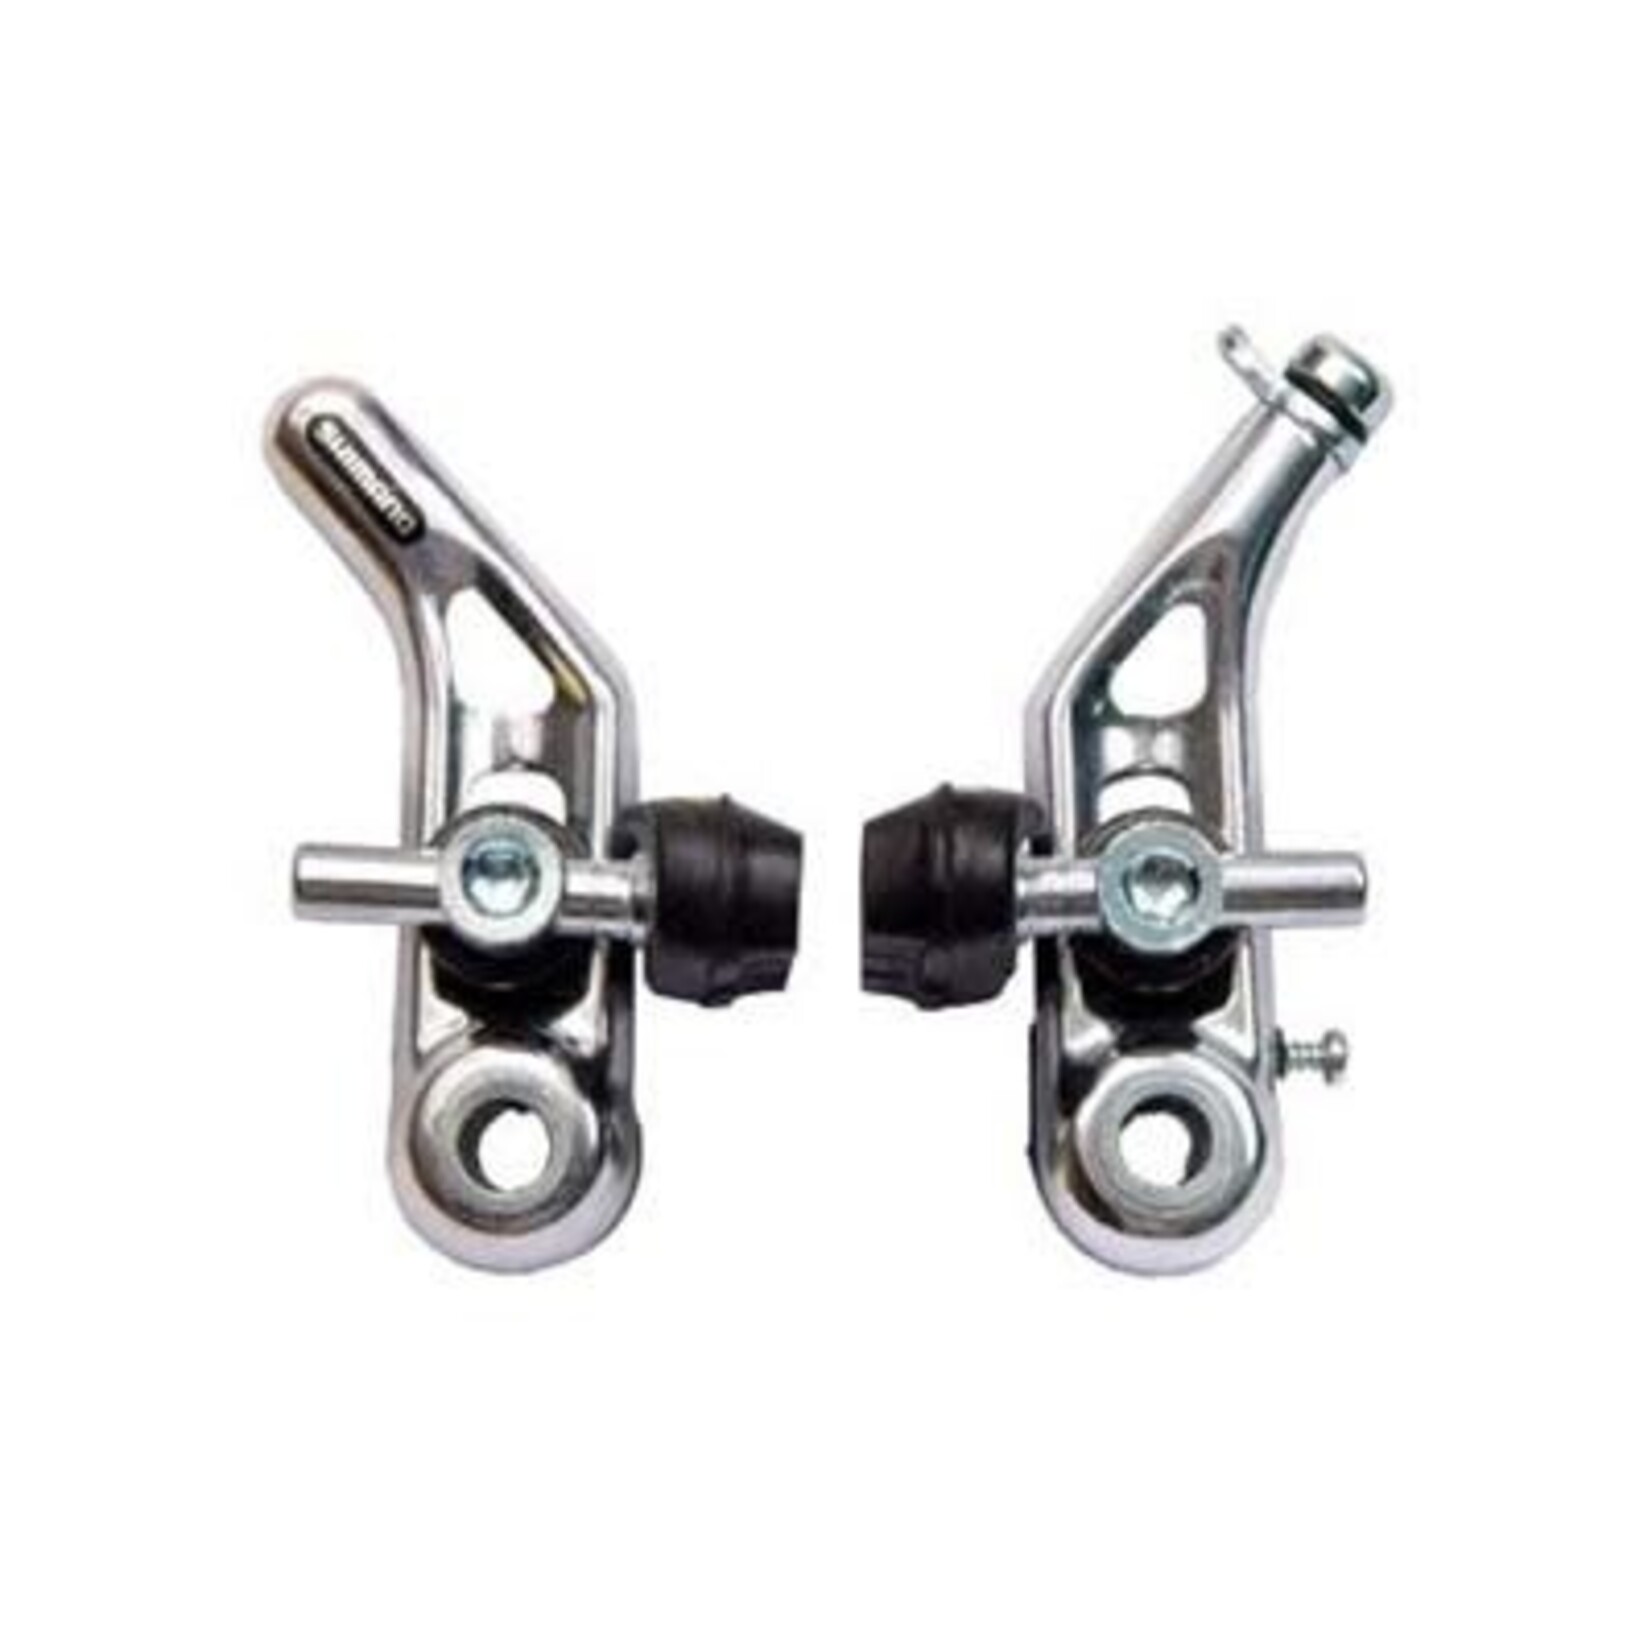 Shimano SHIMANO ALTUS C90 BR-CT91 REAR M-SIZE W/M55T BRAKE SHOE 13.5MM FIXING BOLTS W/Z-TYPE B/82 LINK WIRE IND.PACK